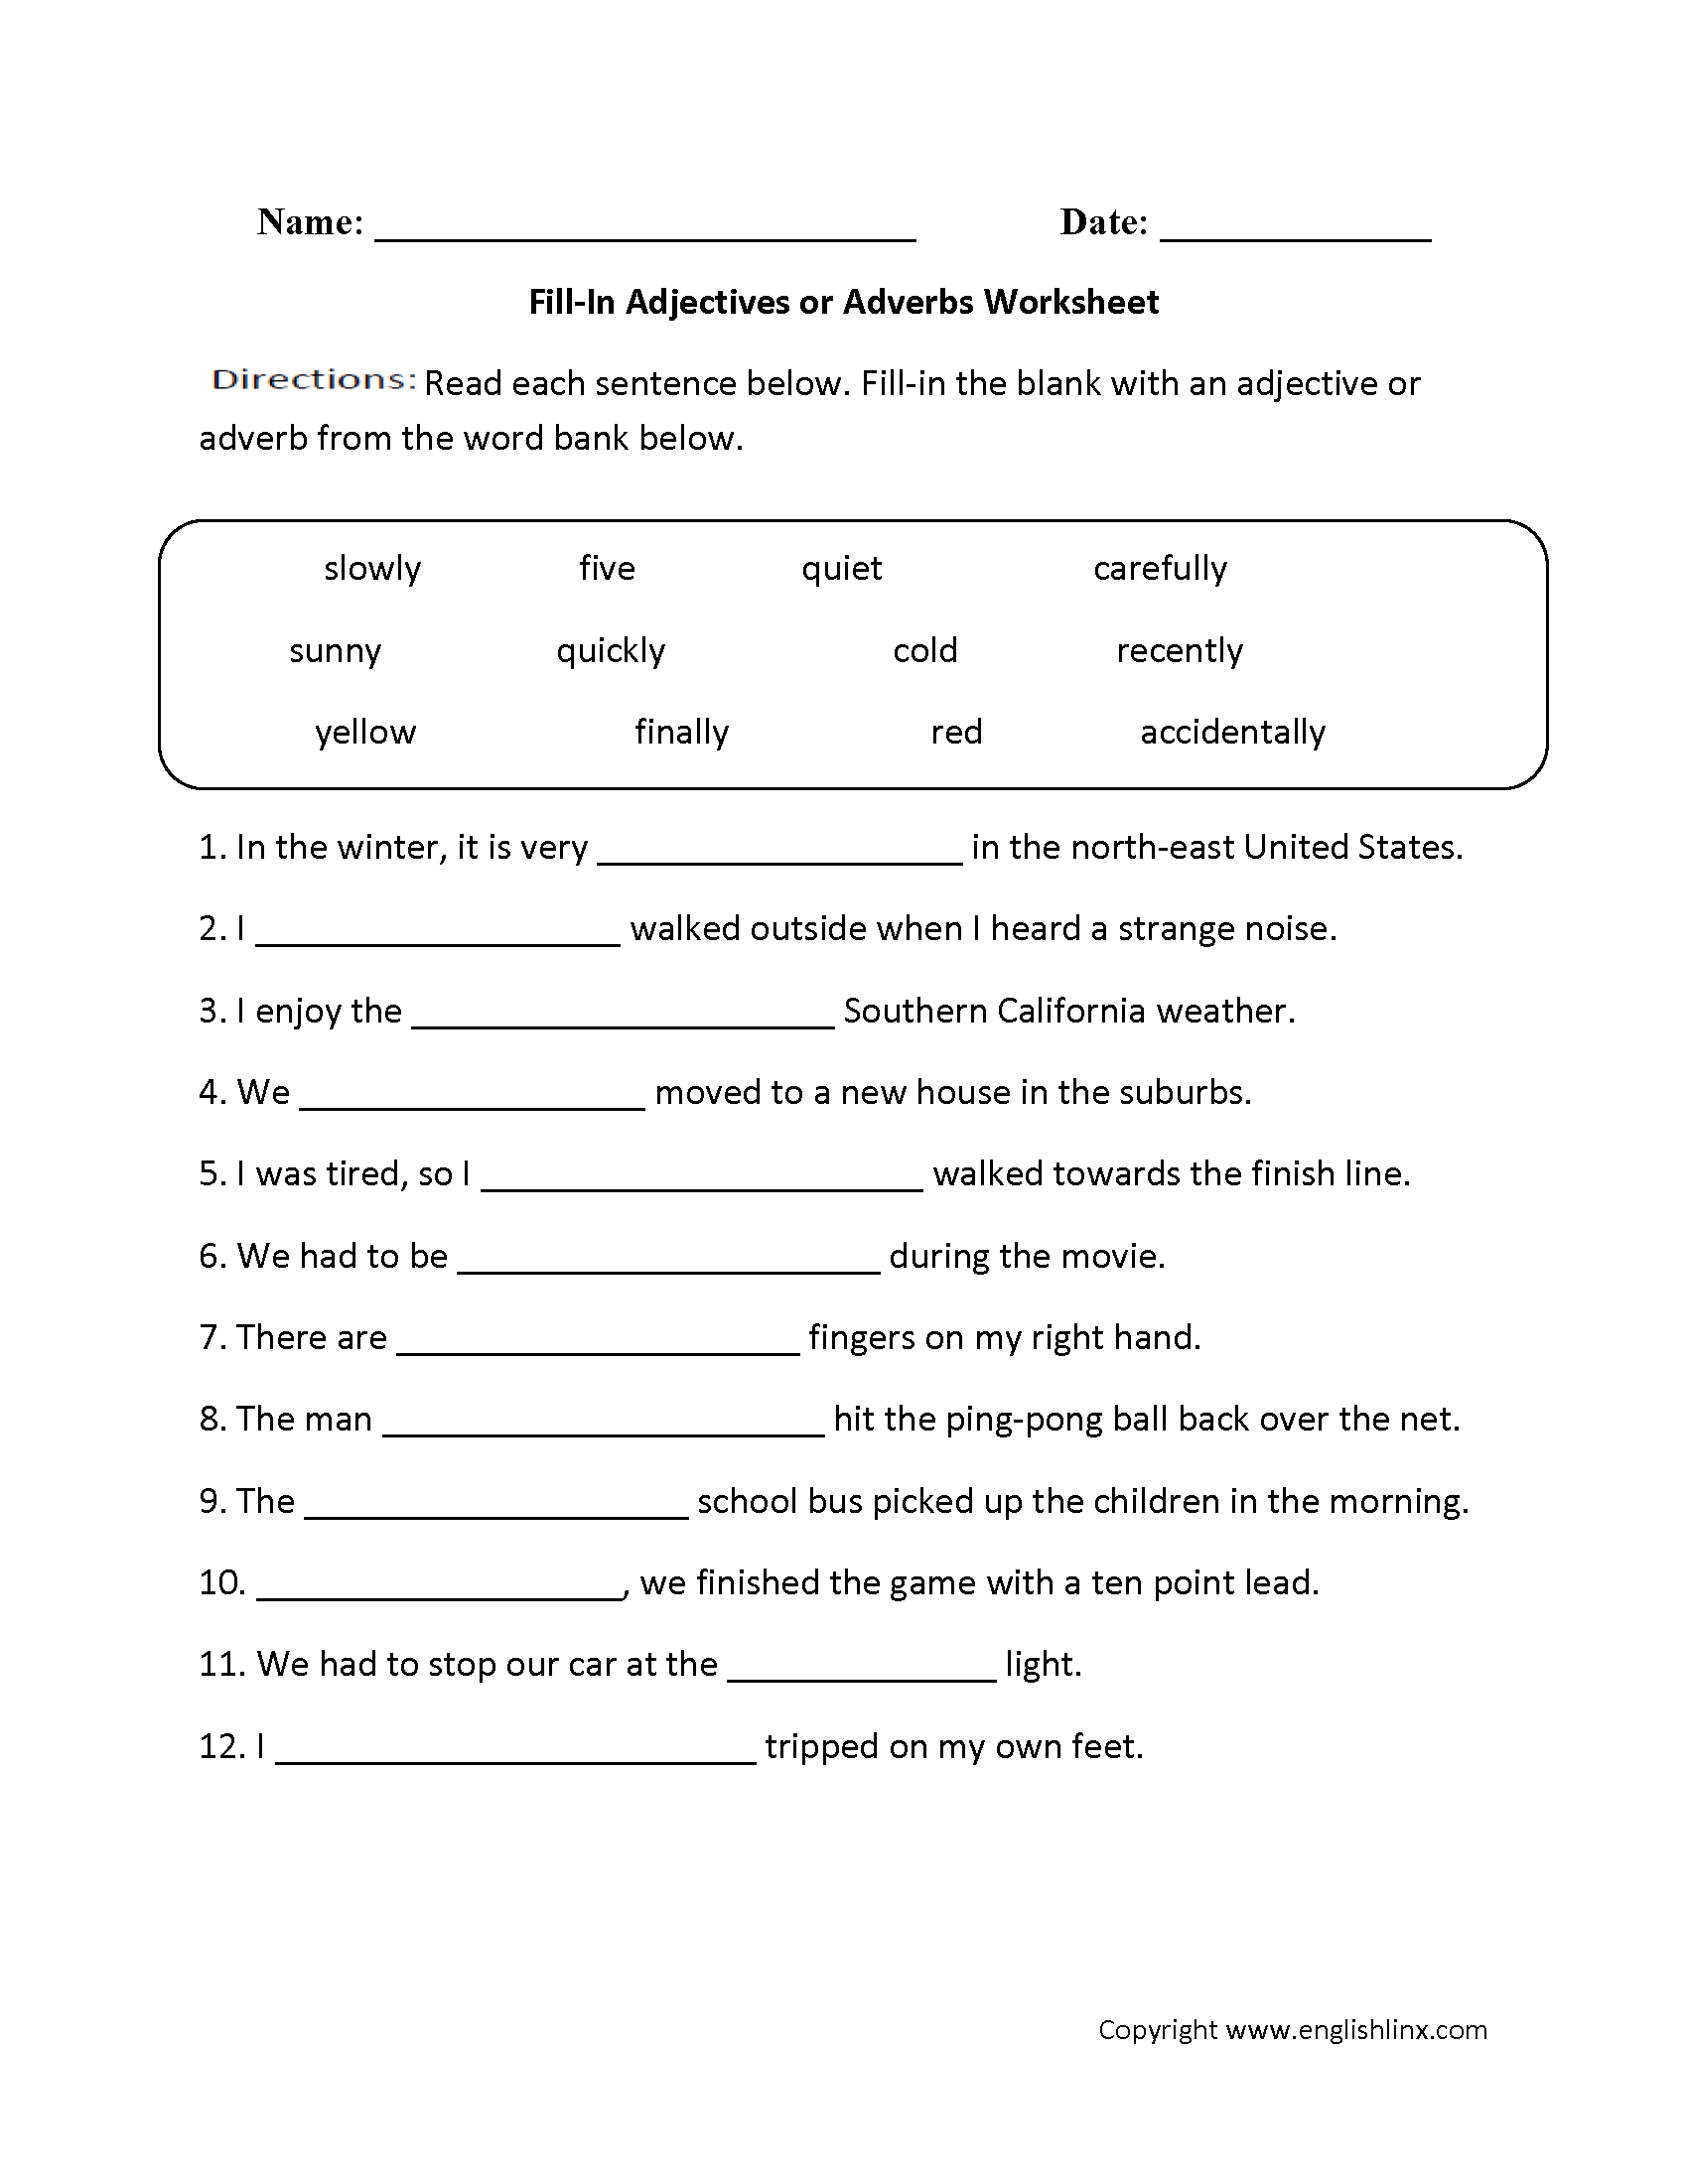 Adjectives Worksheets Adjectives Or Adverbs Worksheets Db excel